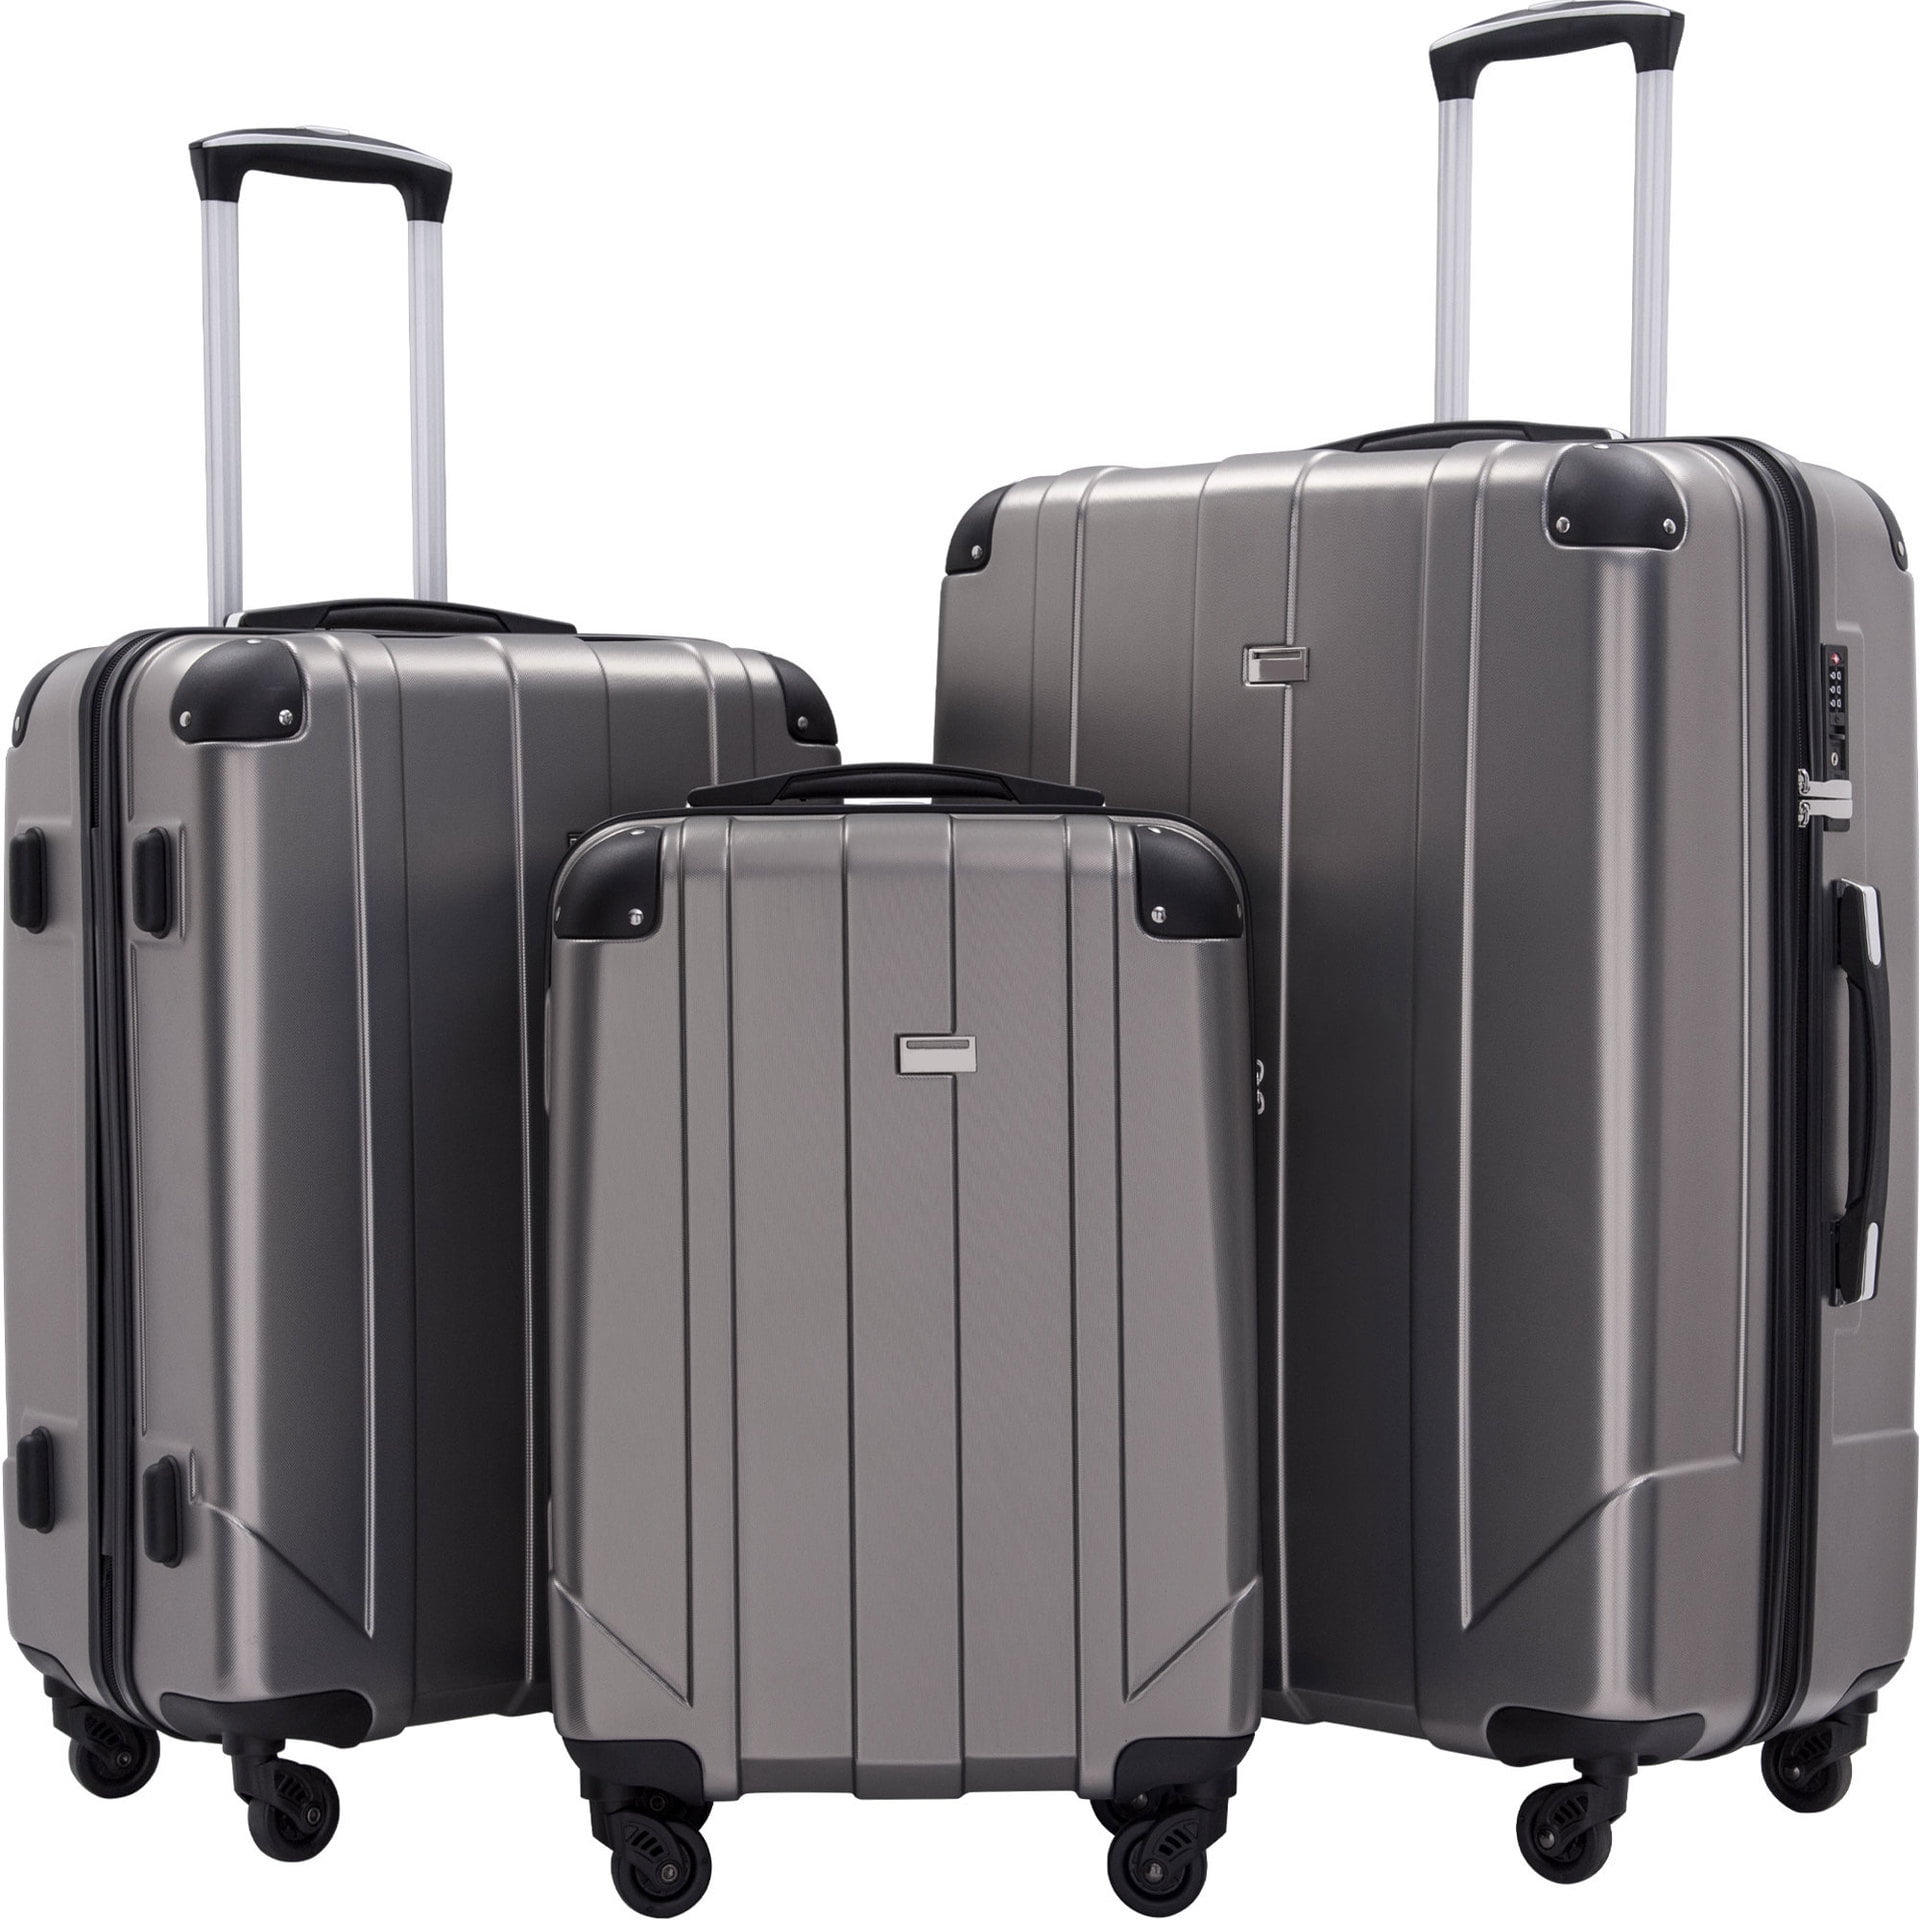 3pcs Carry On Luggage Sets With TSA American Tourister Luggage For Women Men Kids Boys Girls, 20inch 24inch 28inch Gray - Walmart.com